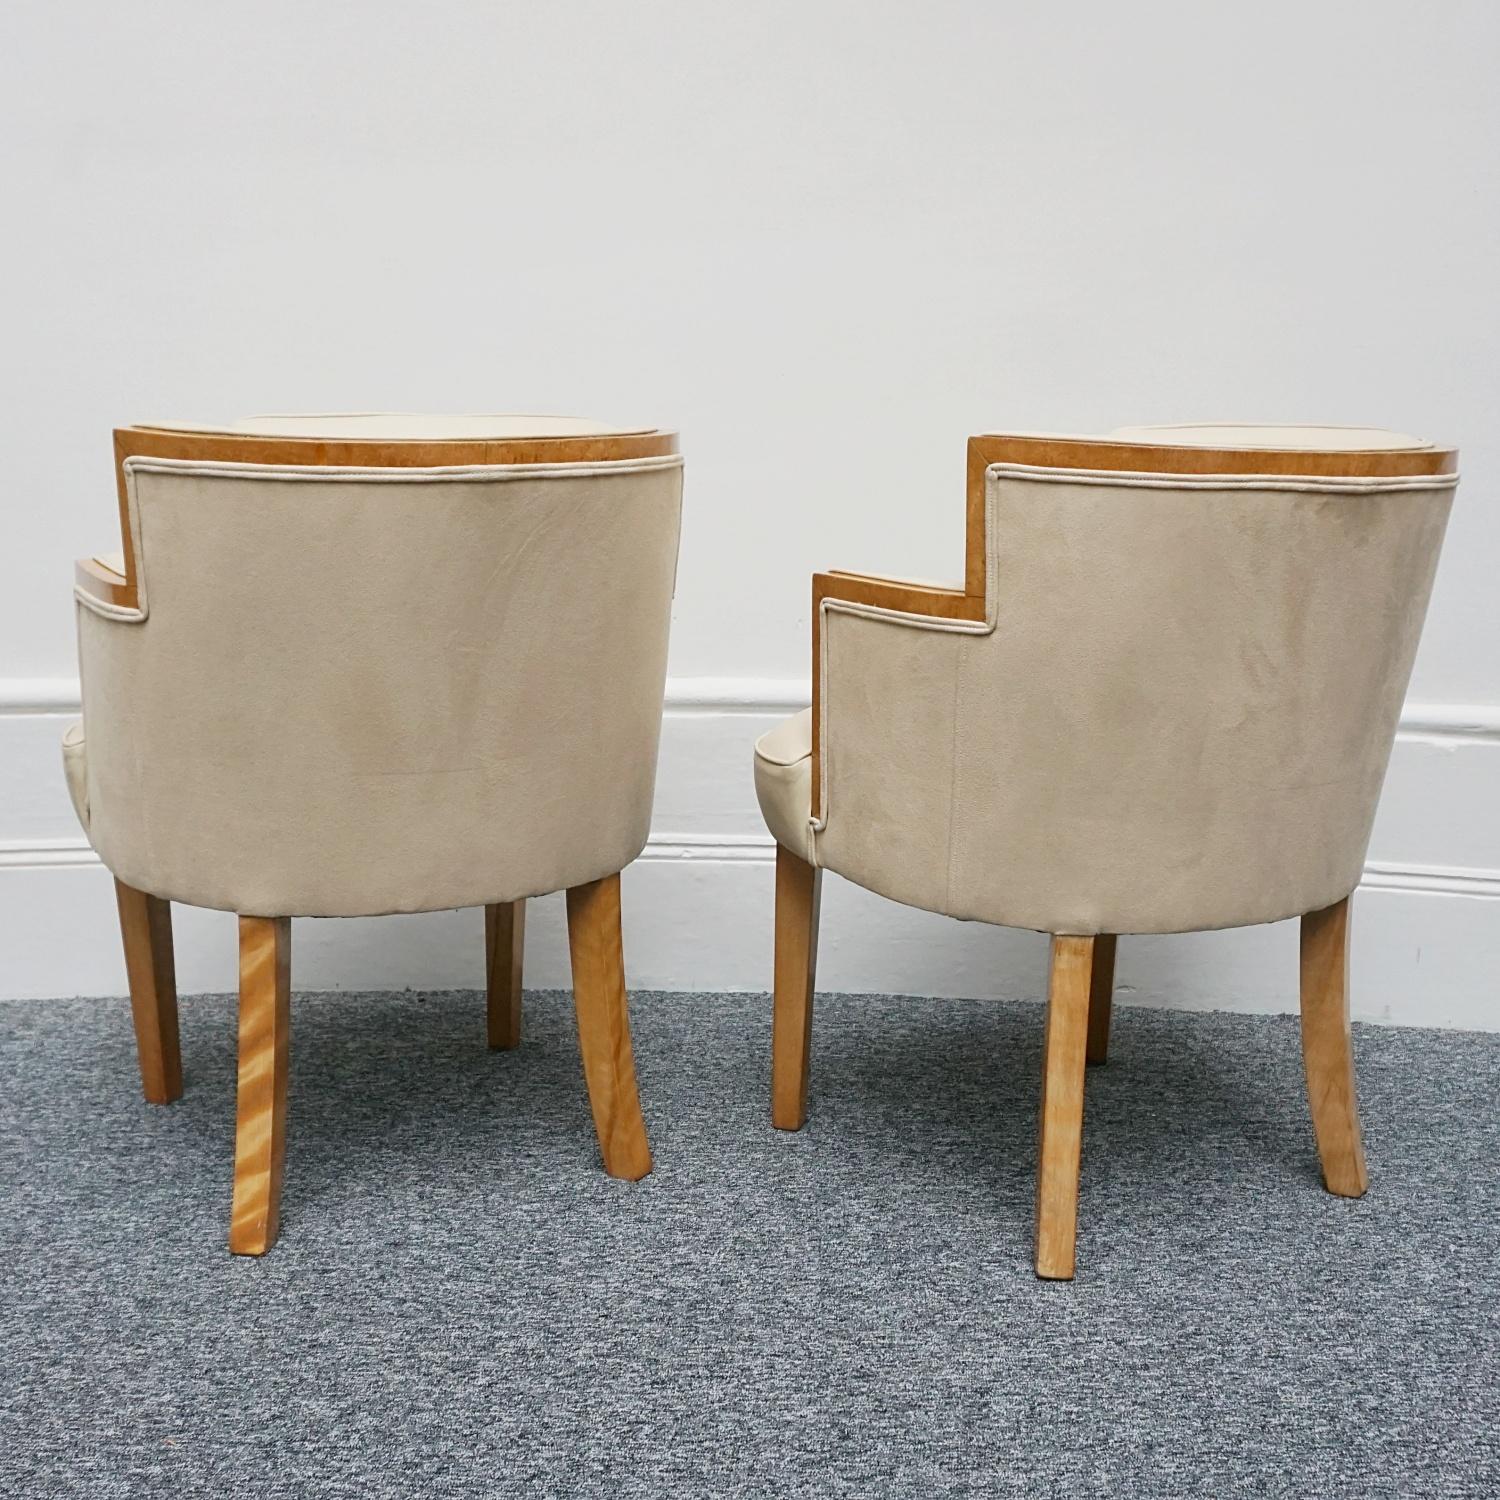 An Original Pair of Art Deco Bankers Chairs English Circa 1935  For Sale 2